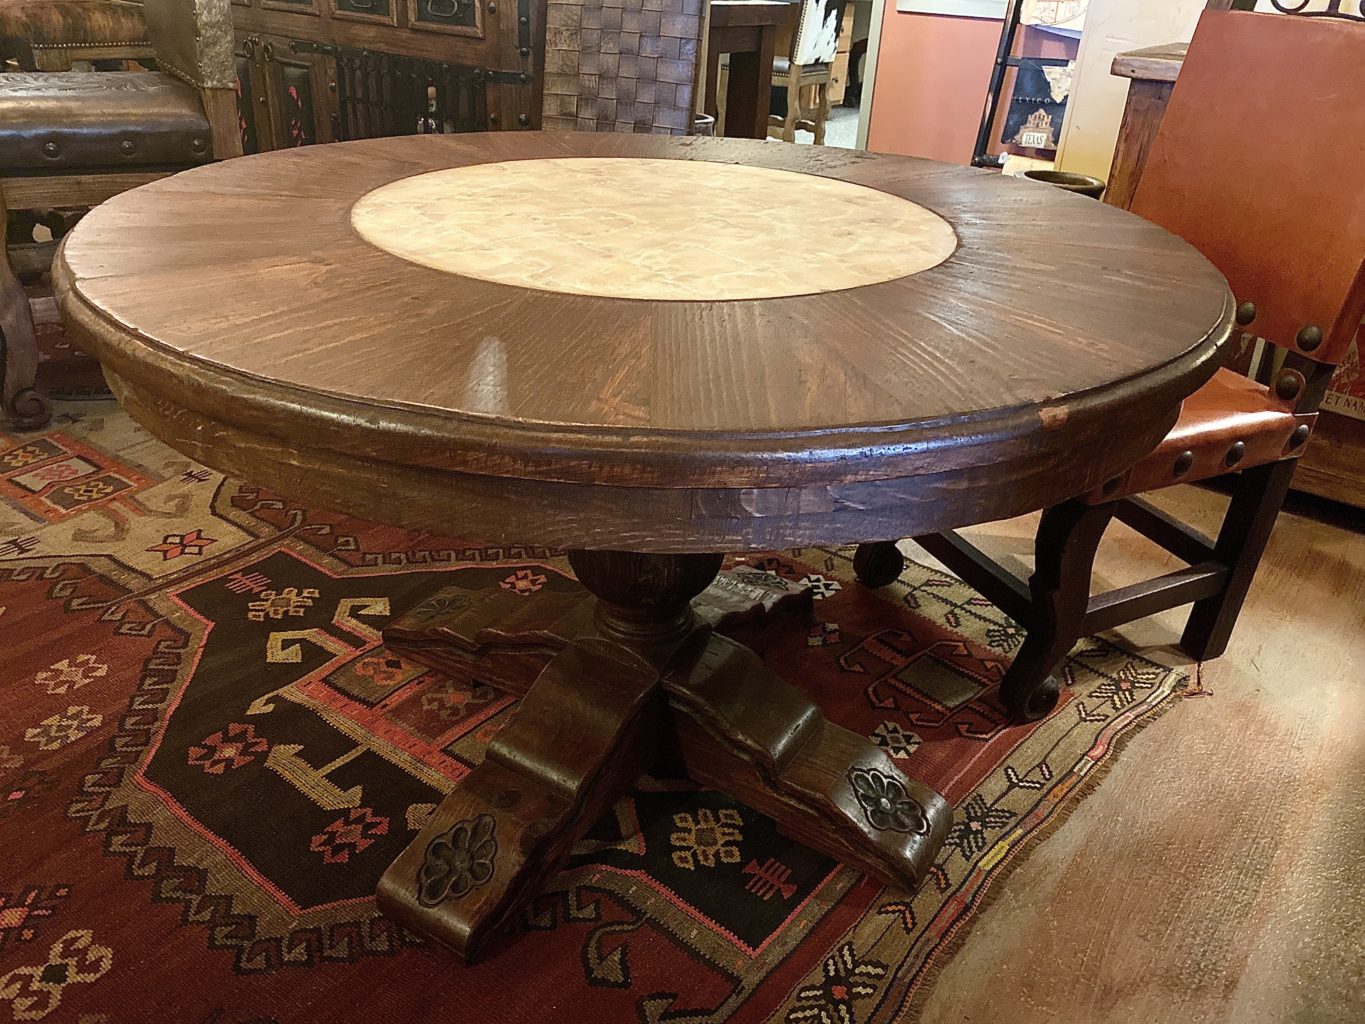 Round Wormwood Table with Onyx Inlay